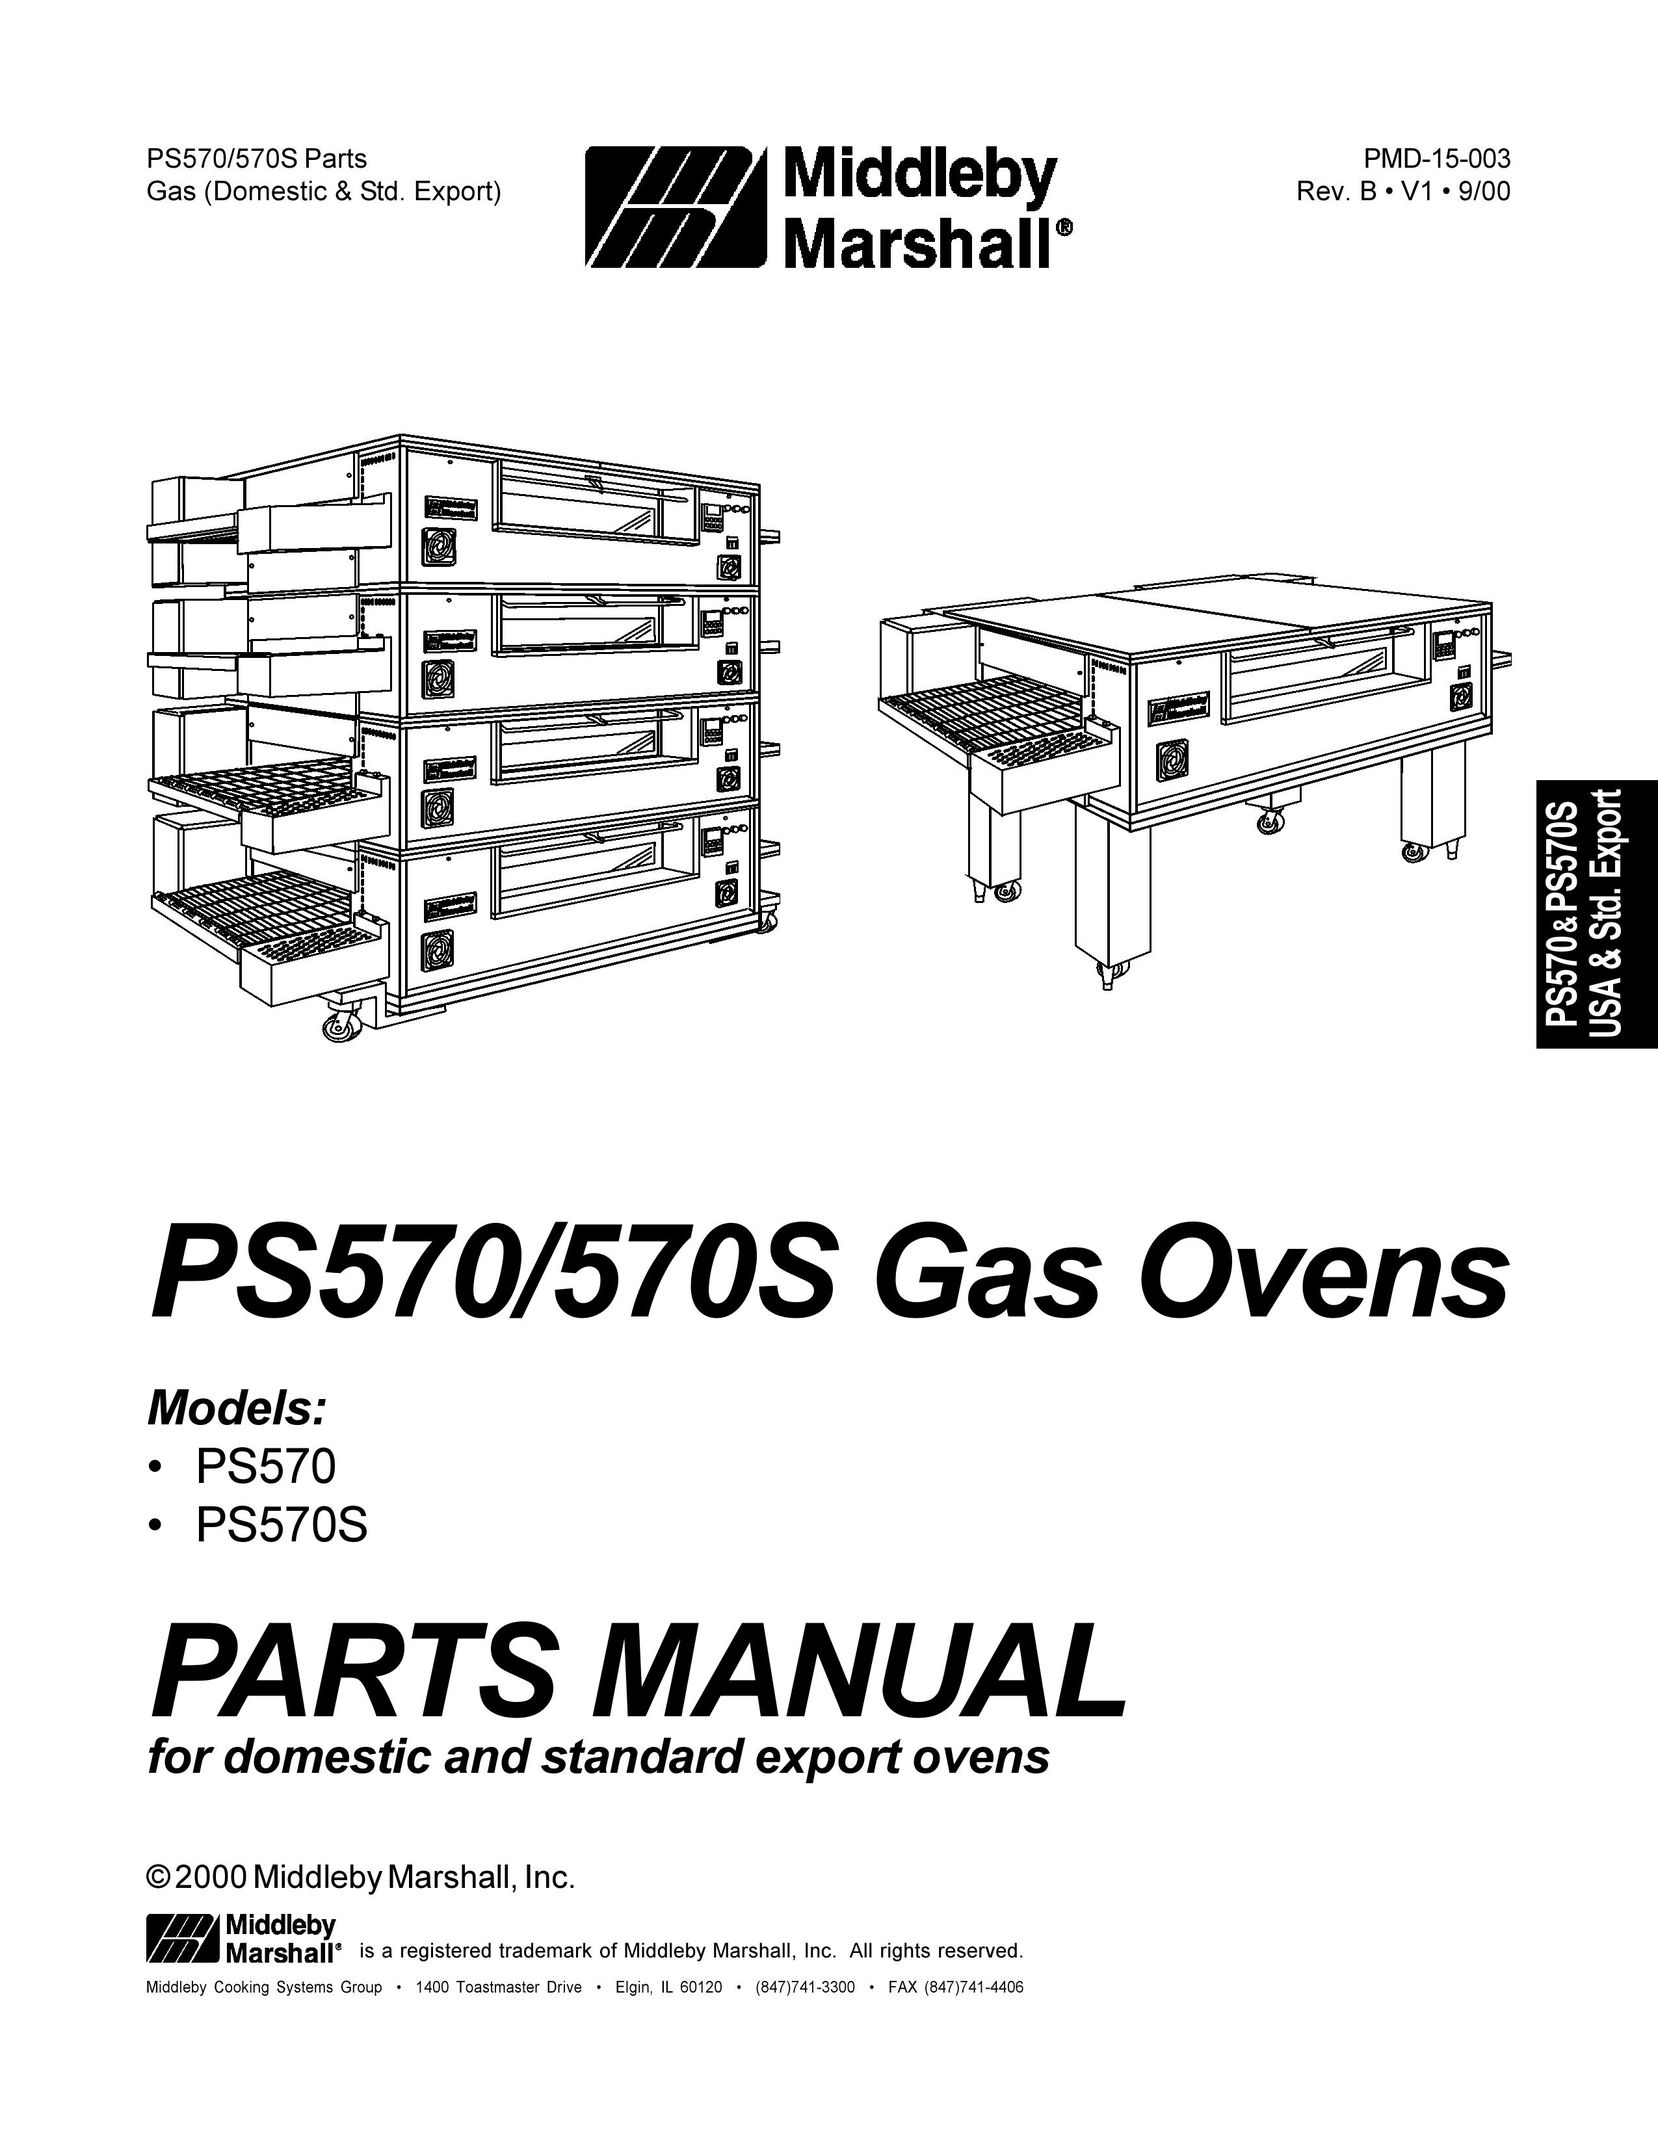 Middleby Marshall PS570S Oven User Manual